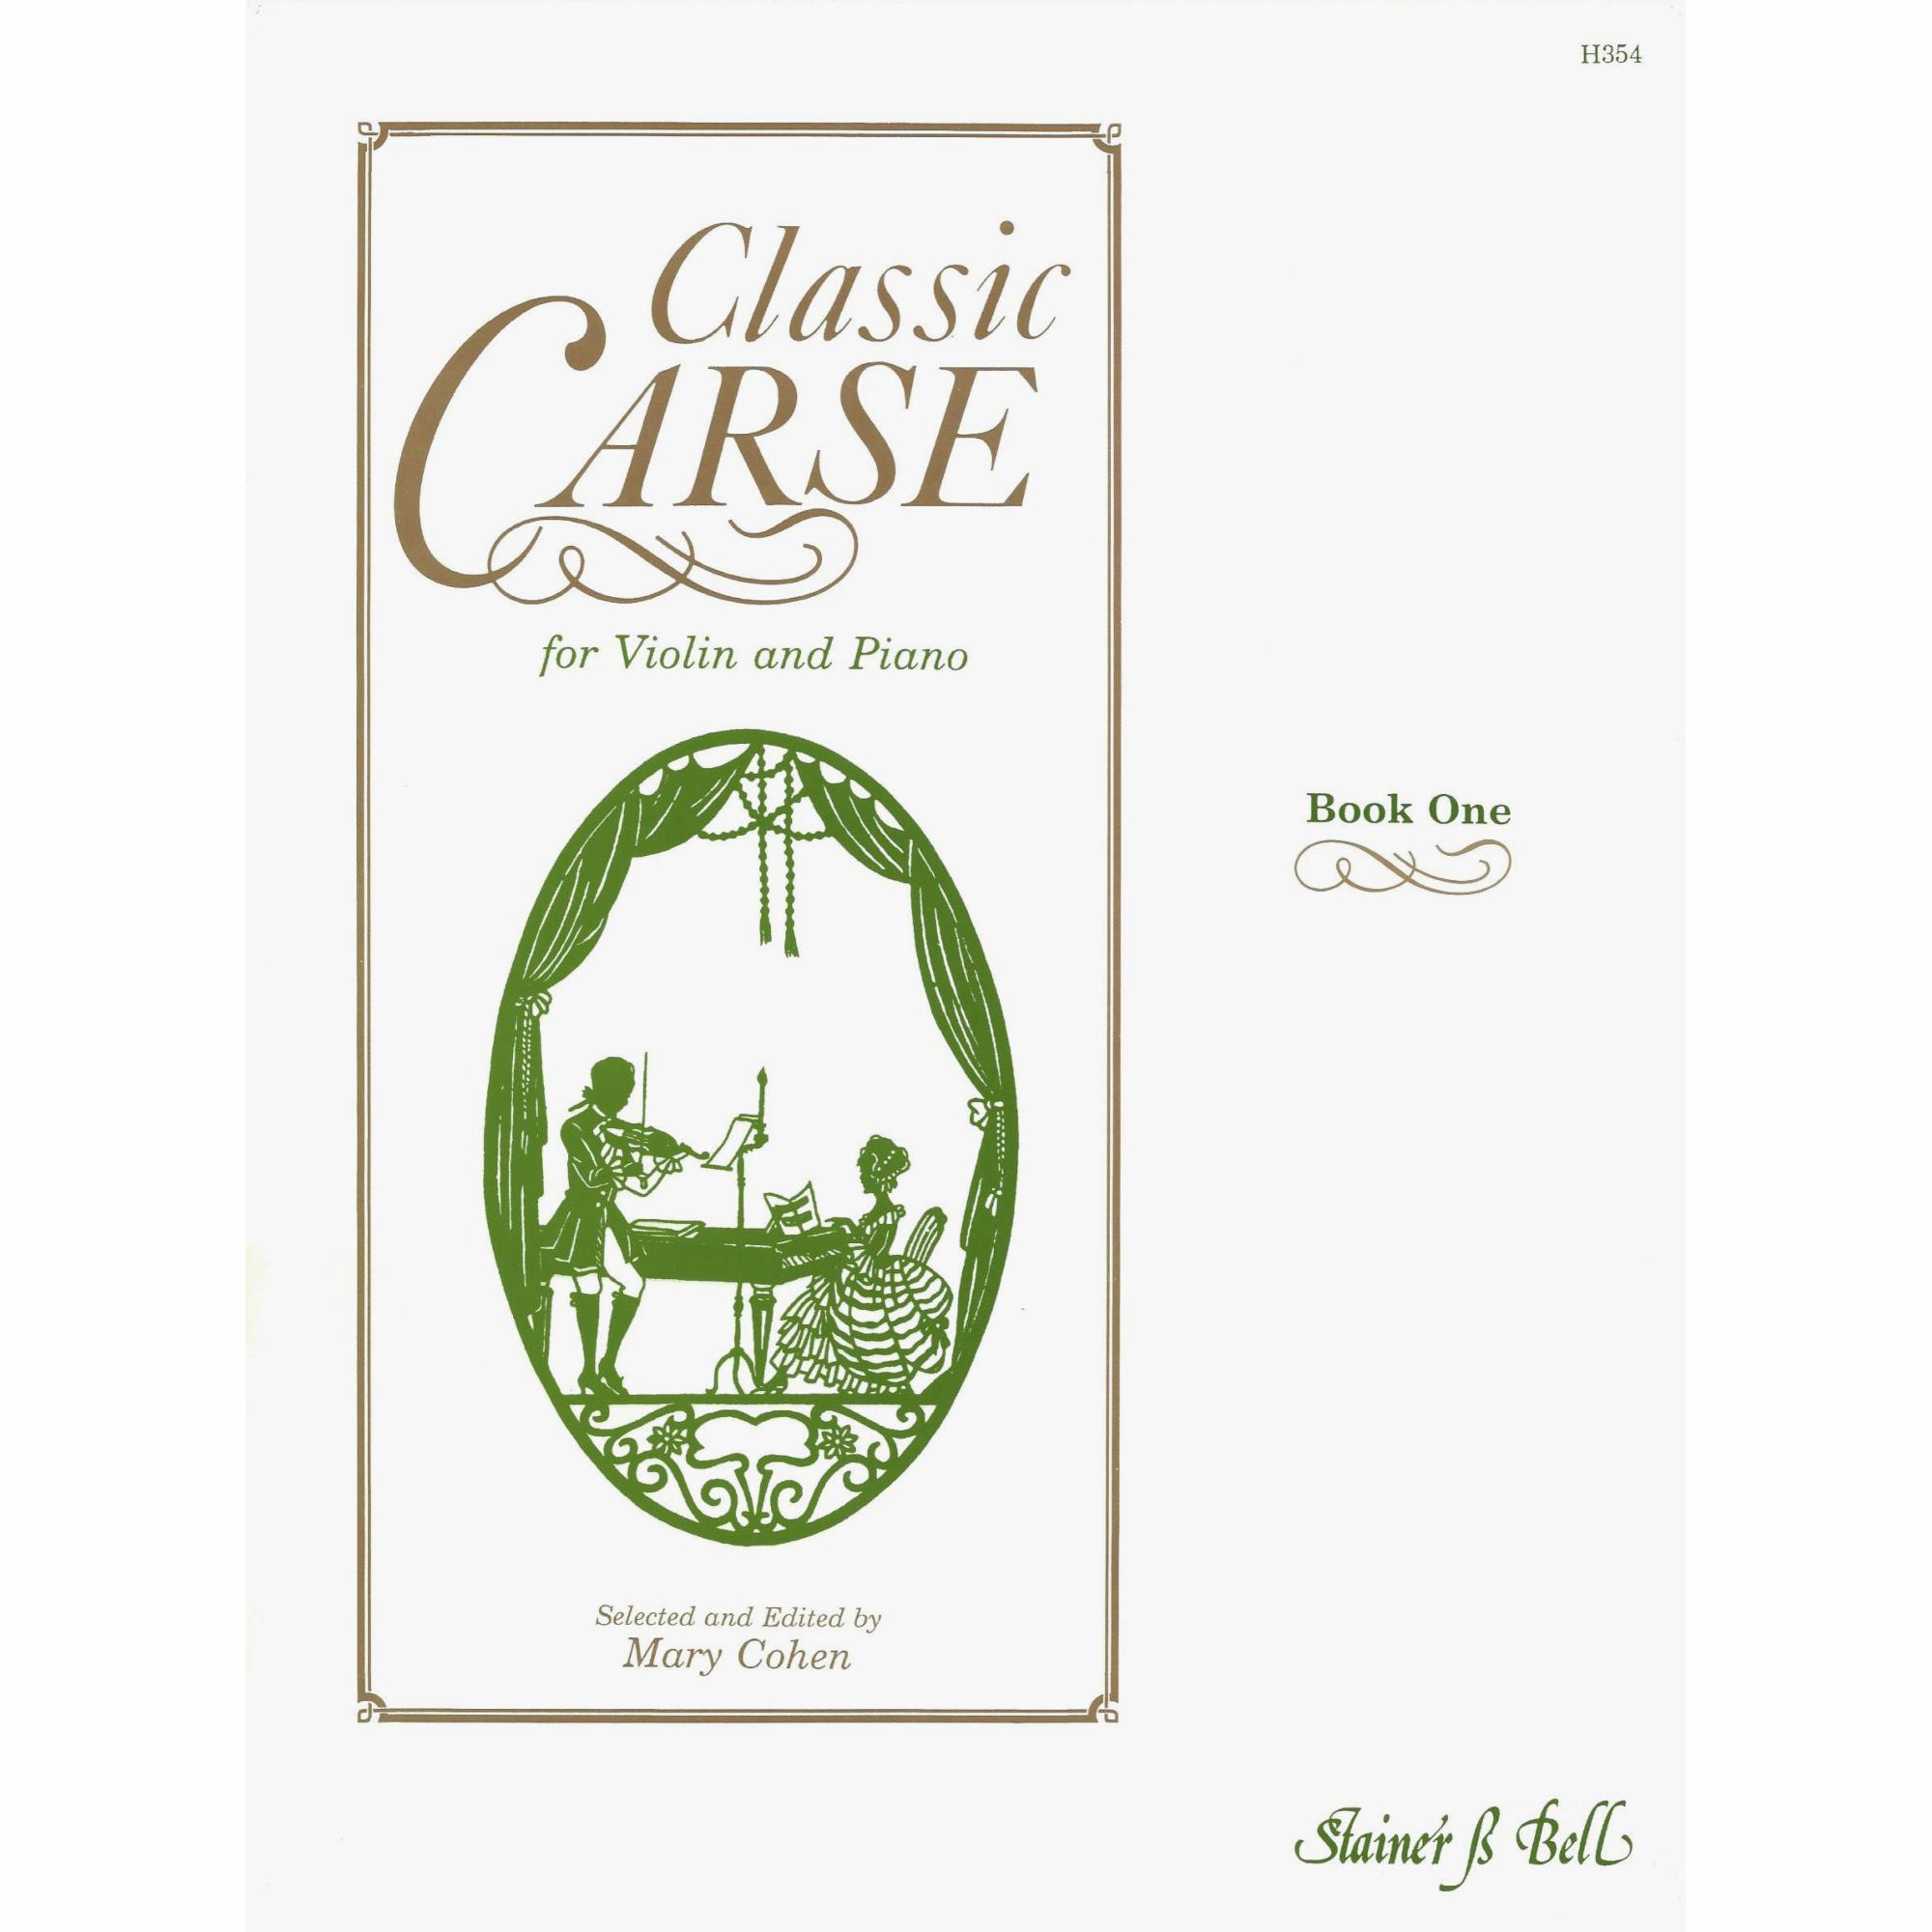 Classic Carse, Books One & Two for Violin and Piano